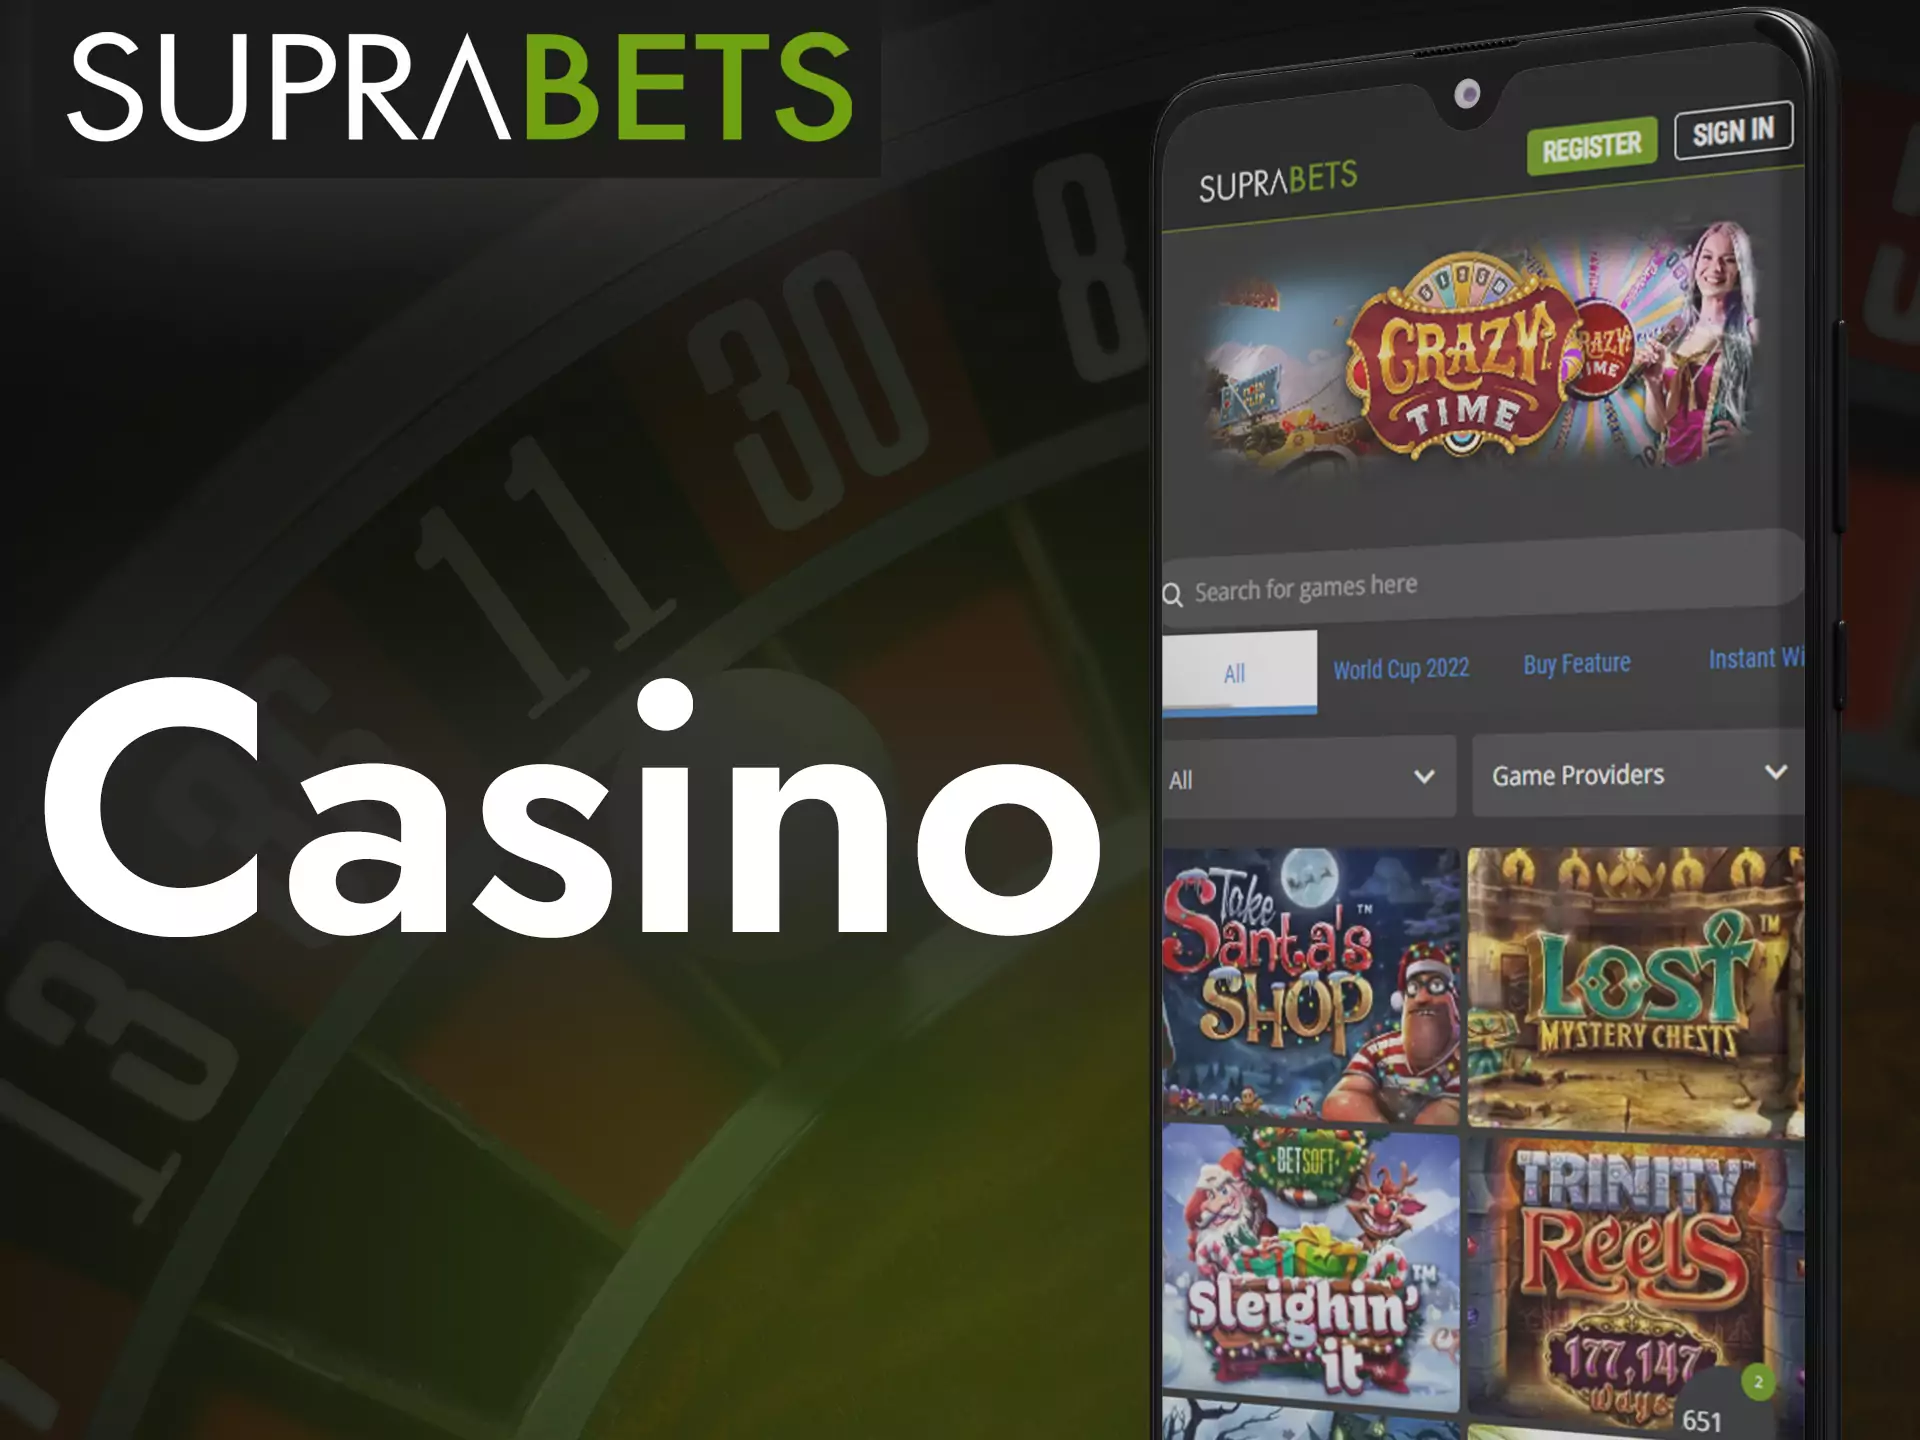 Suprabets offers players to plunge into the fascinating world of Casino and try different games.